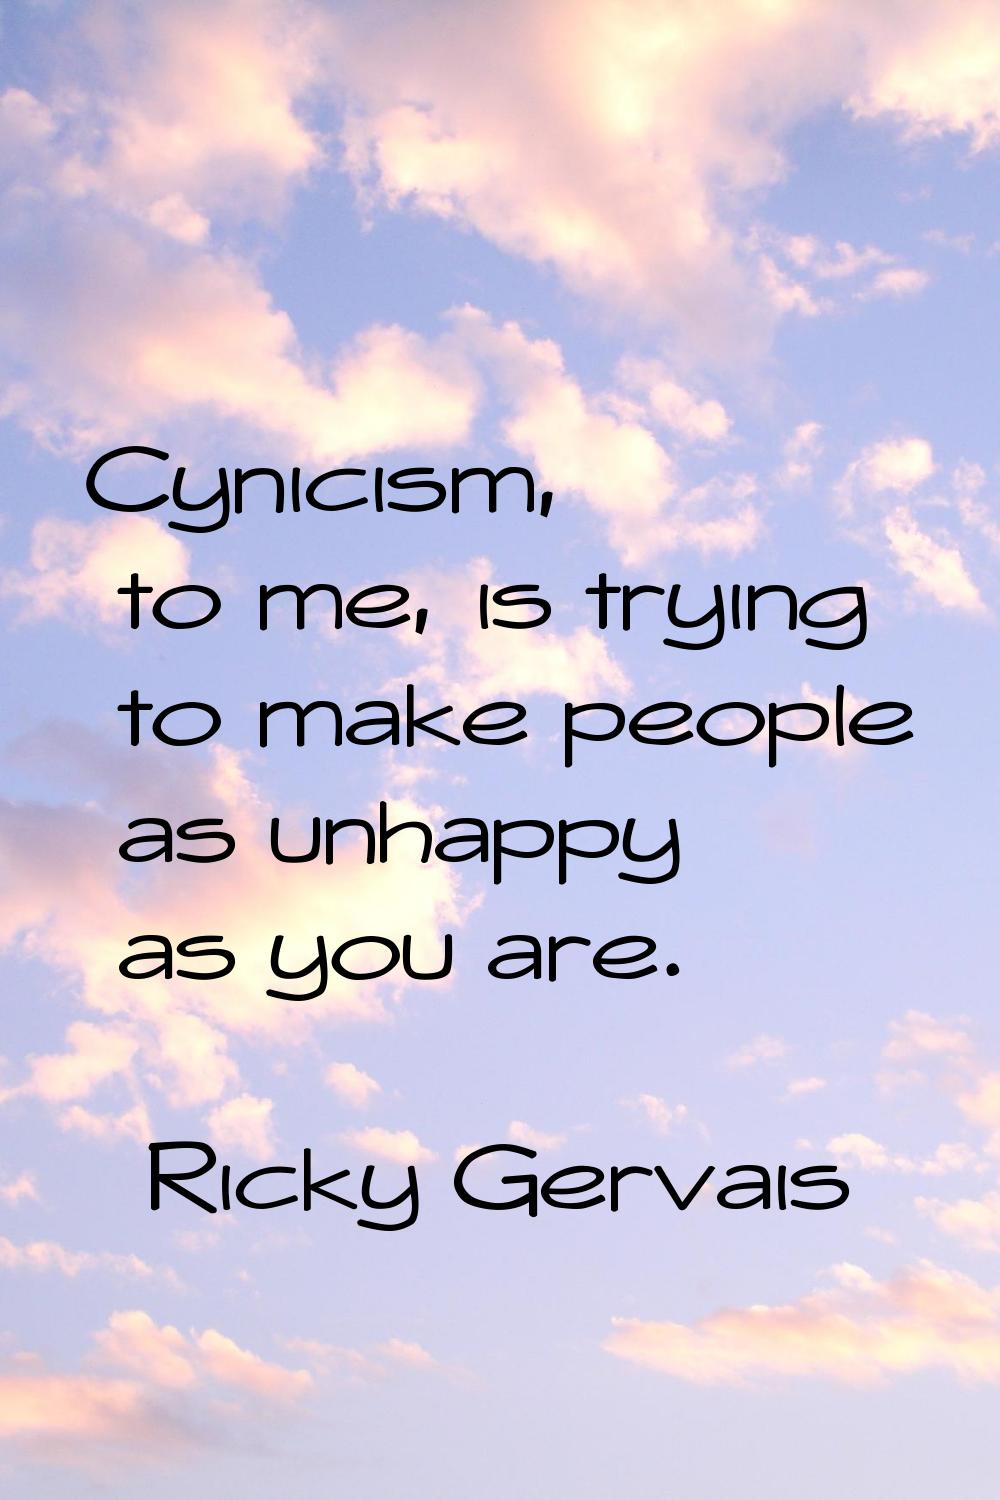 Cynicism, to me, is trying to make people as unhappy as you are.